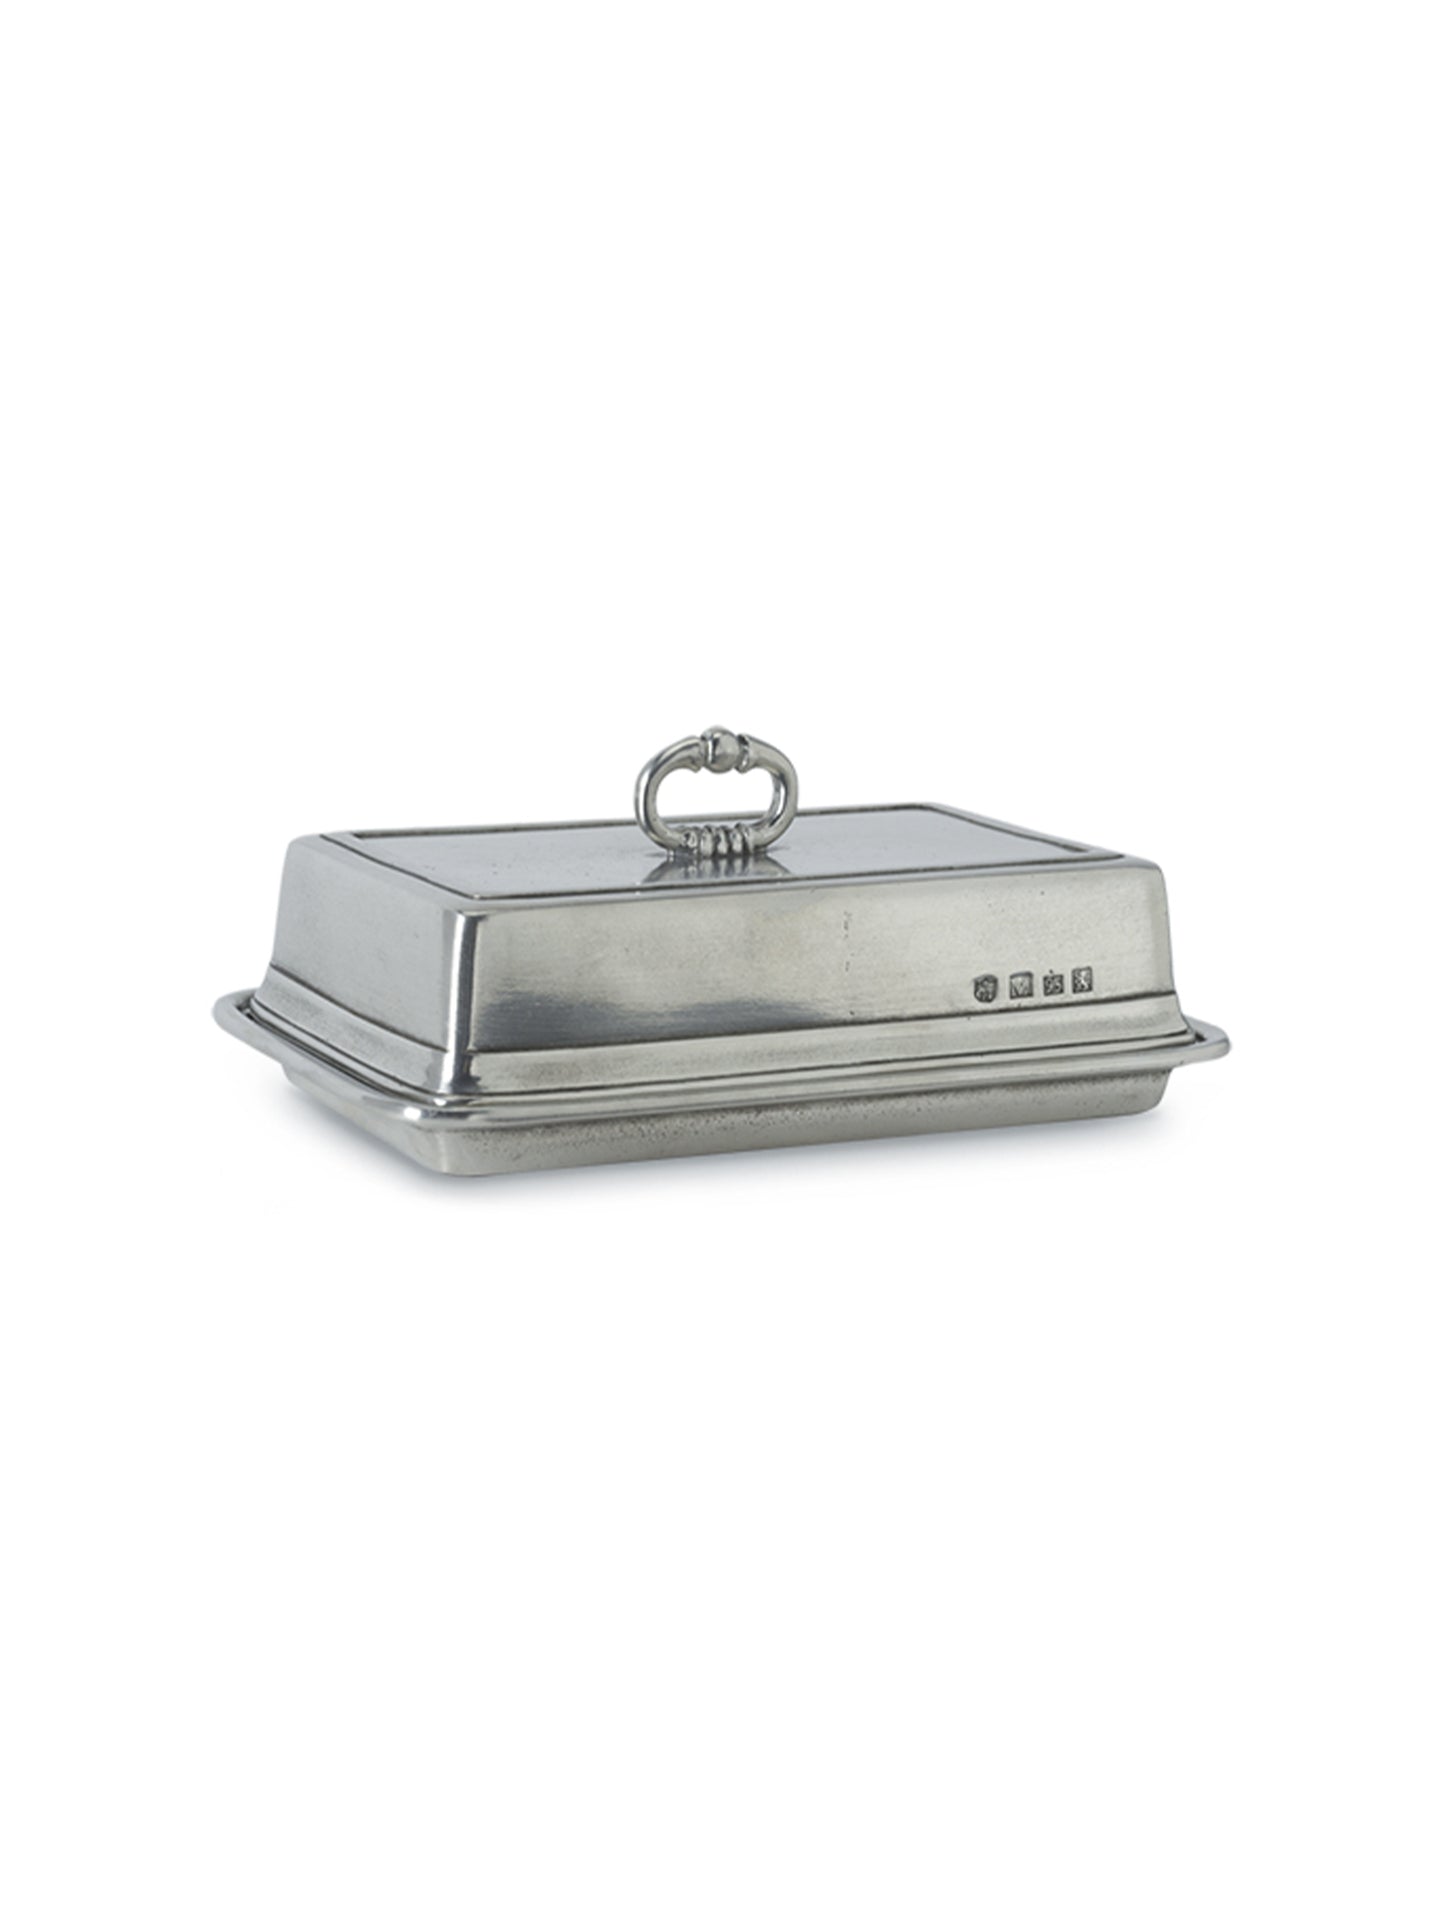 MATCH Pewter Covered Double Butter Dish Weston Table